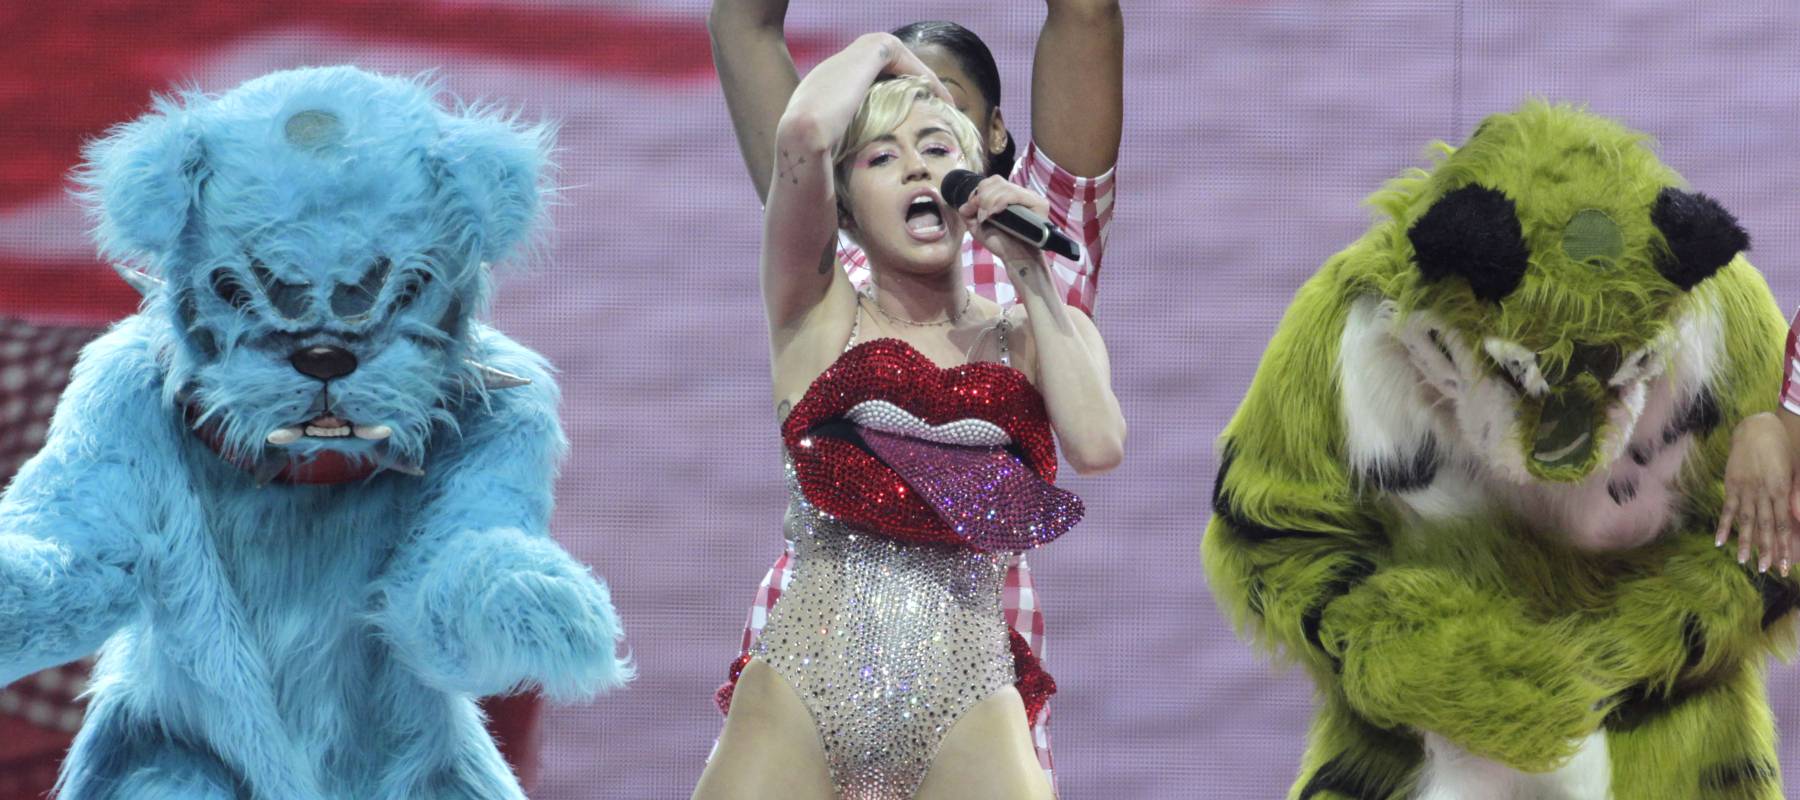 Miley Cyrus performing during Germany stop on her Bangerz Tour.